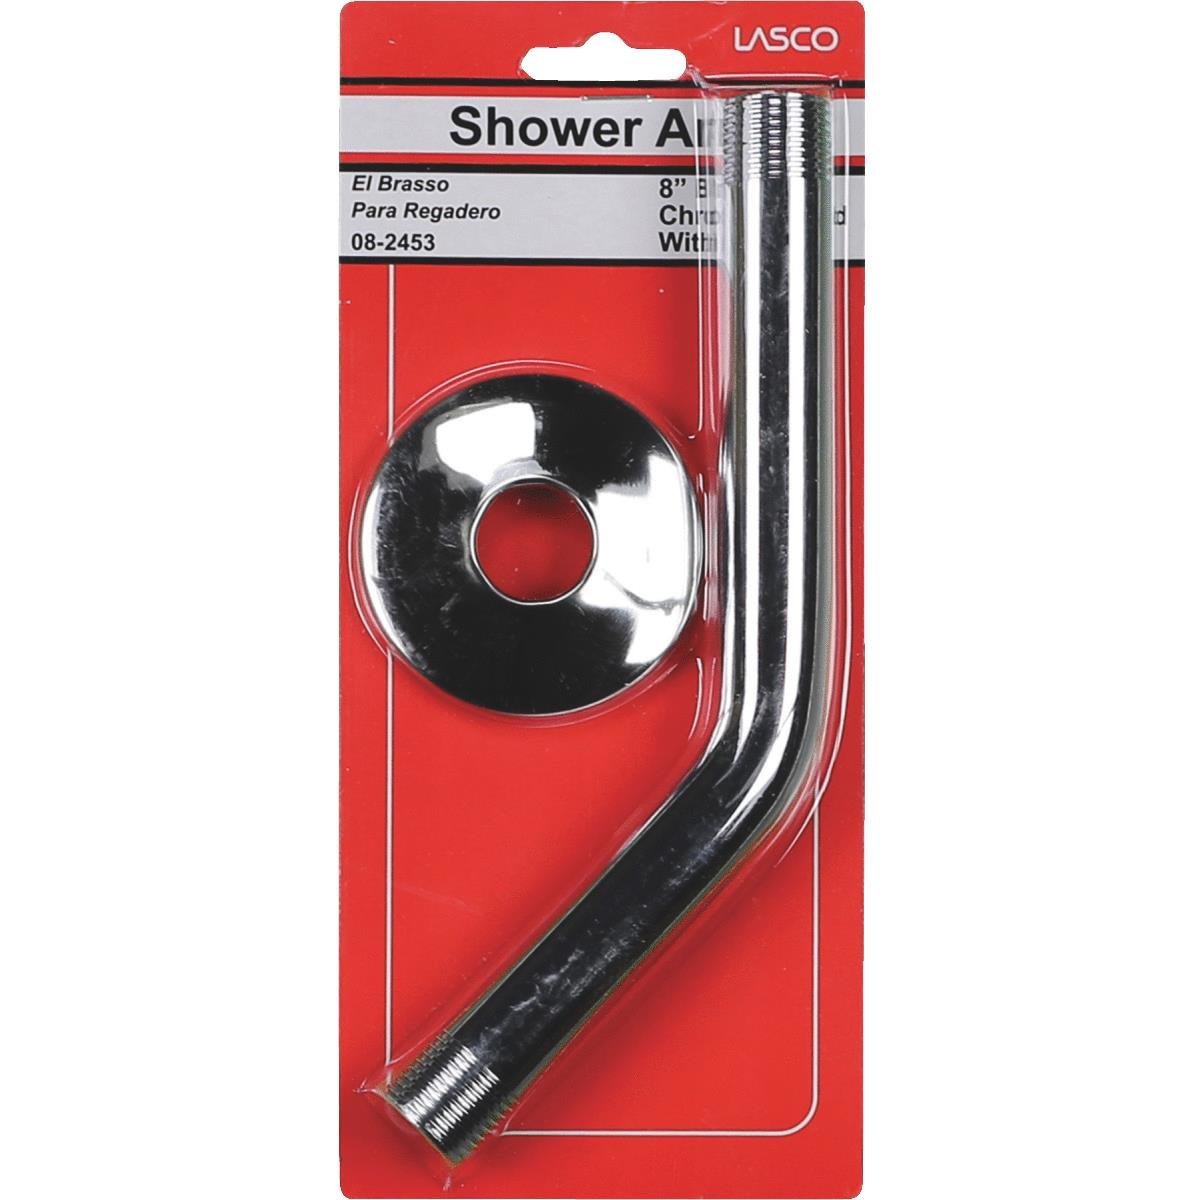 Lasco 08-2453 Shower Arm with Wall Flange, Chrome Plated, 1/2" x 8"